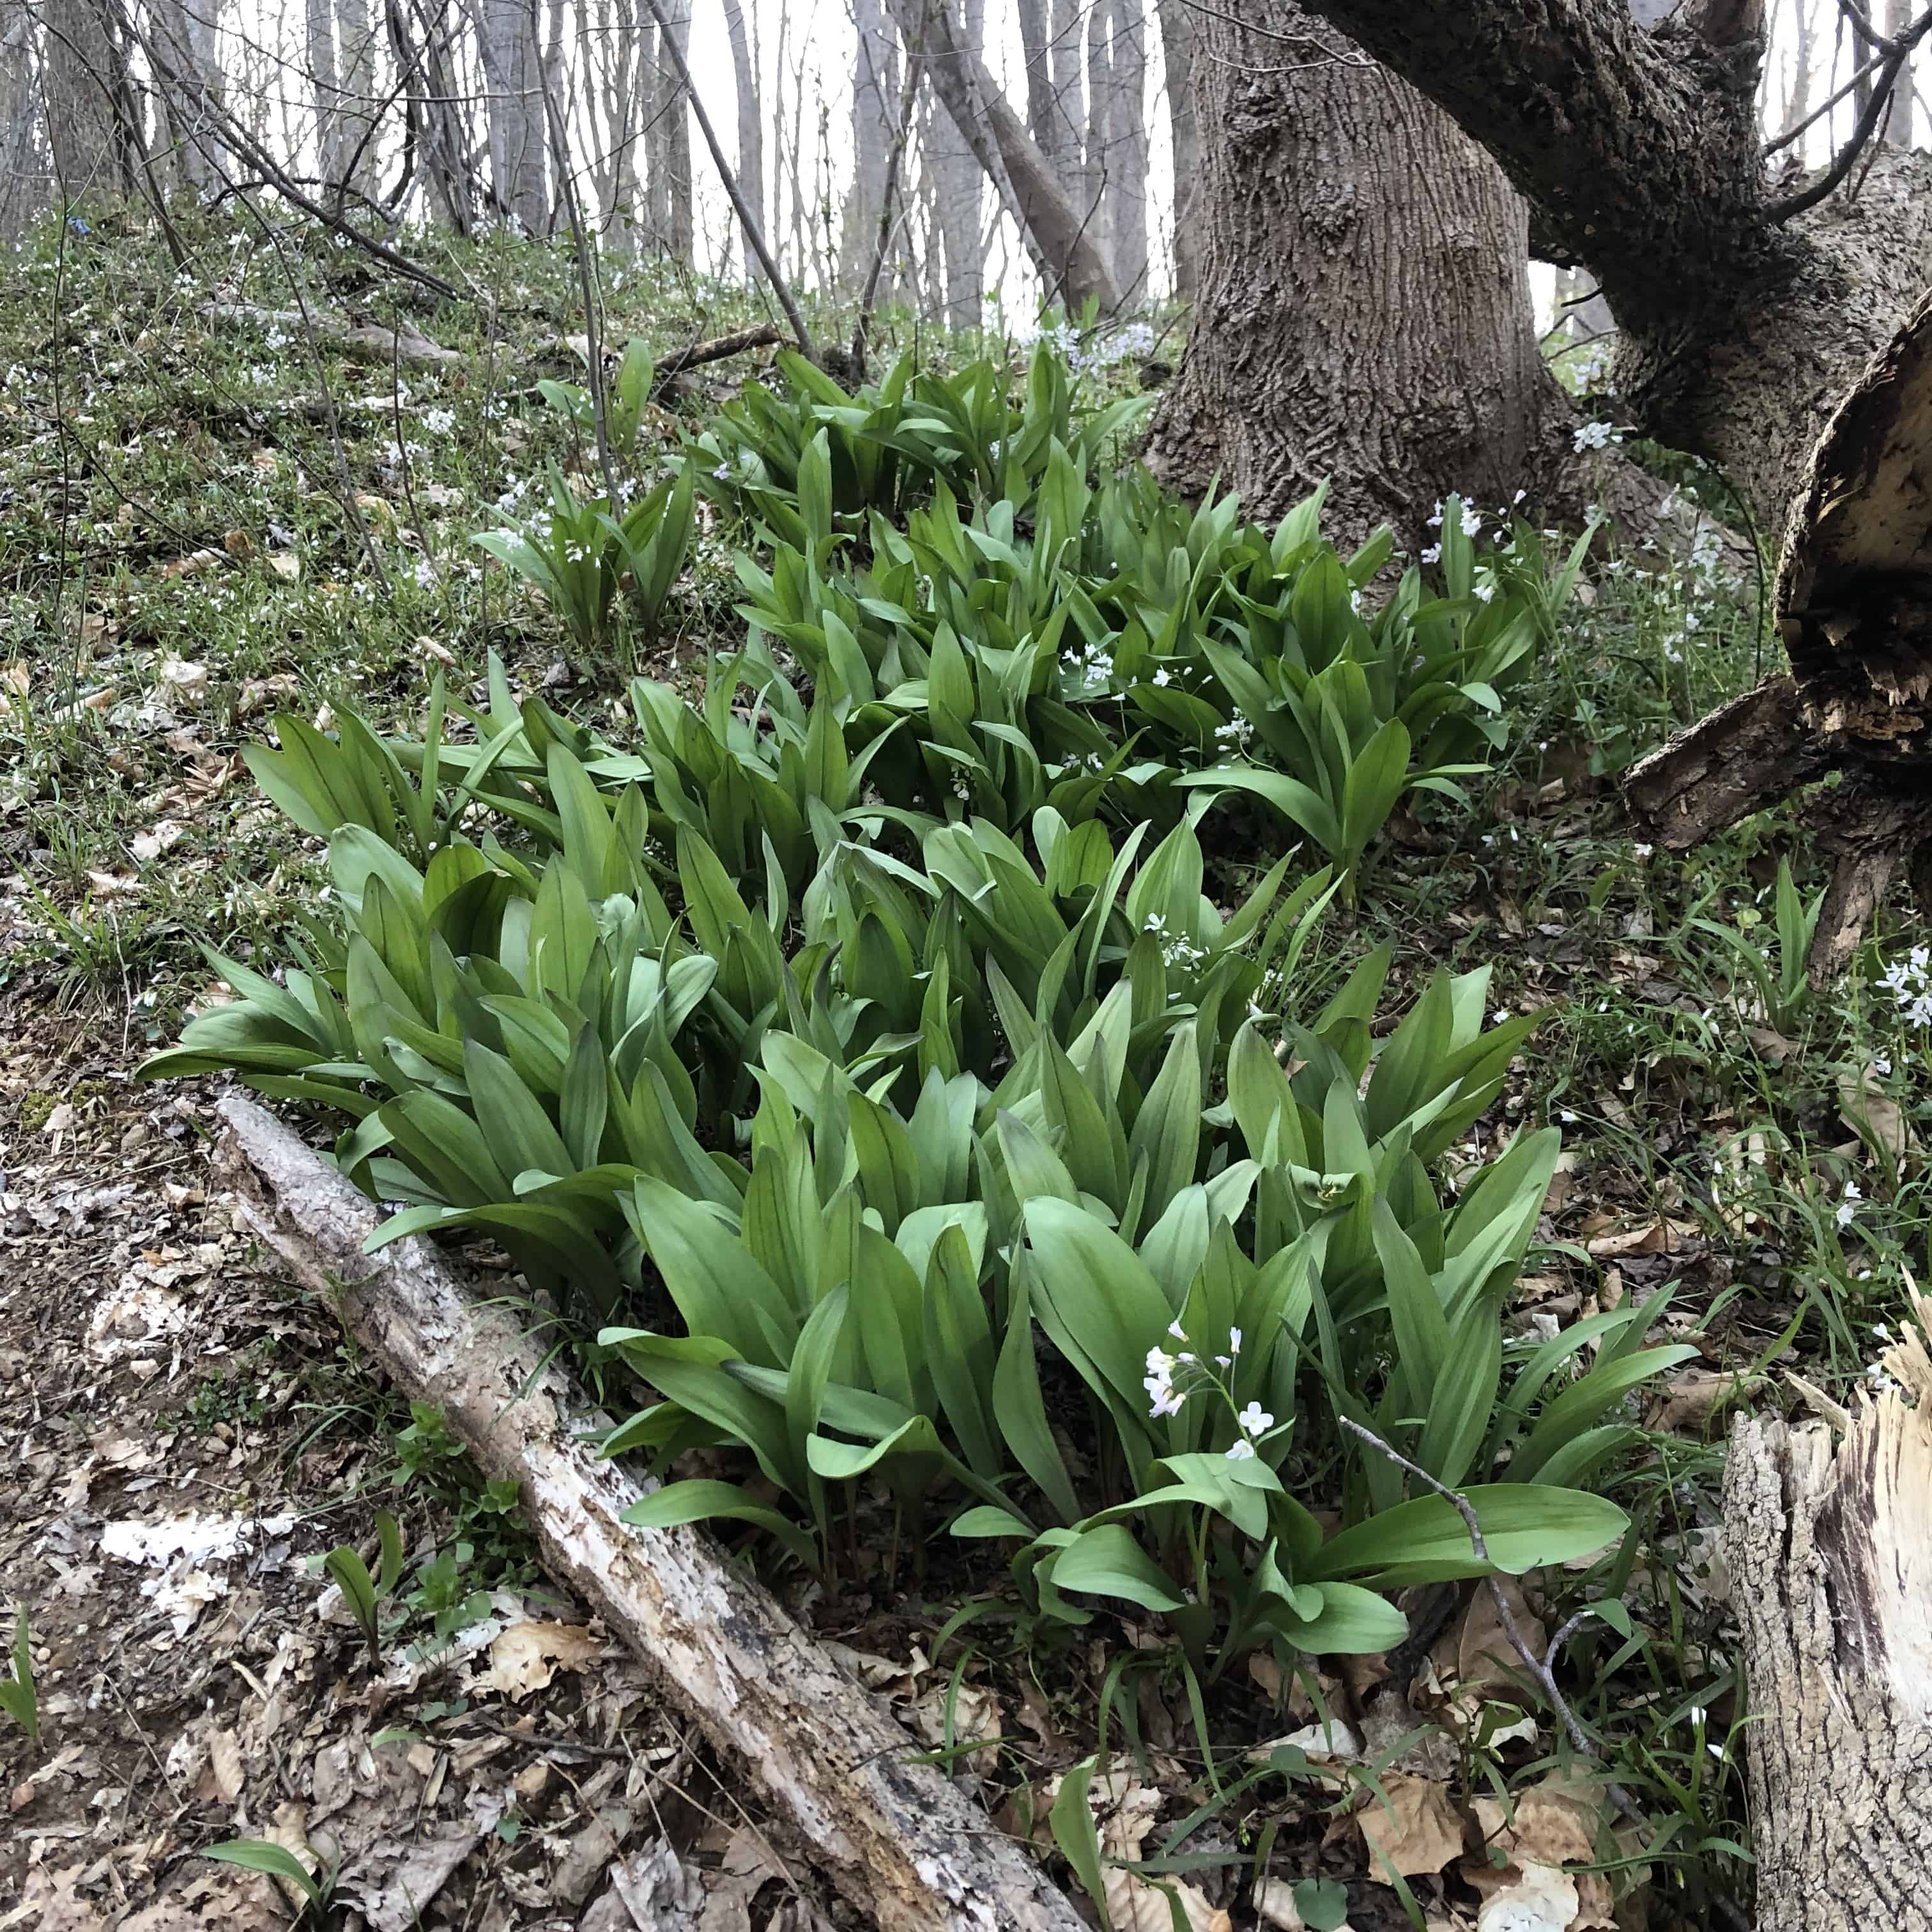 A patch of ramps in Northern VA